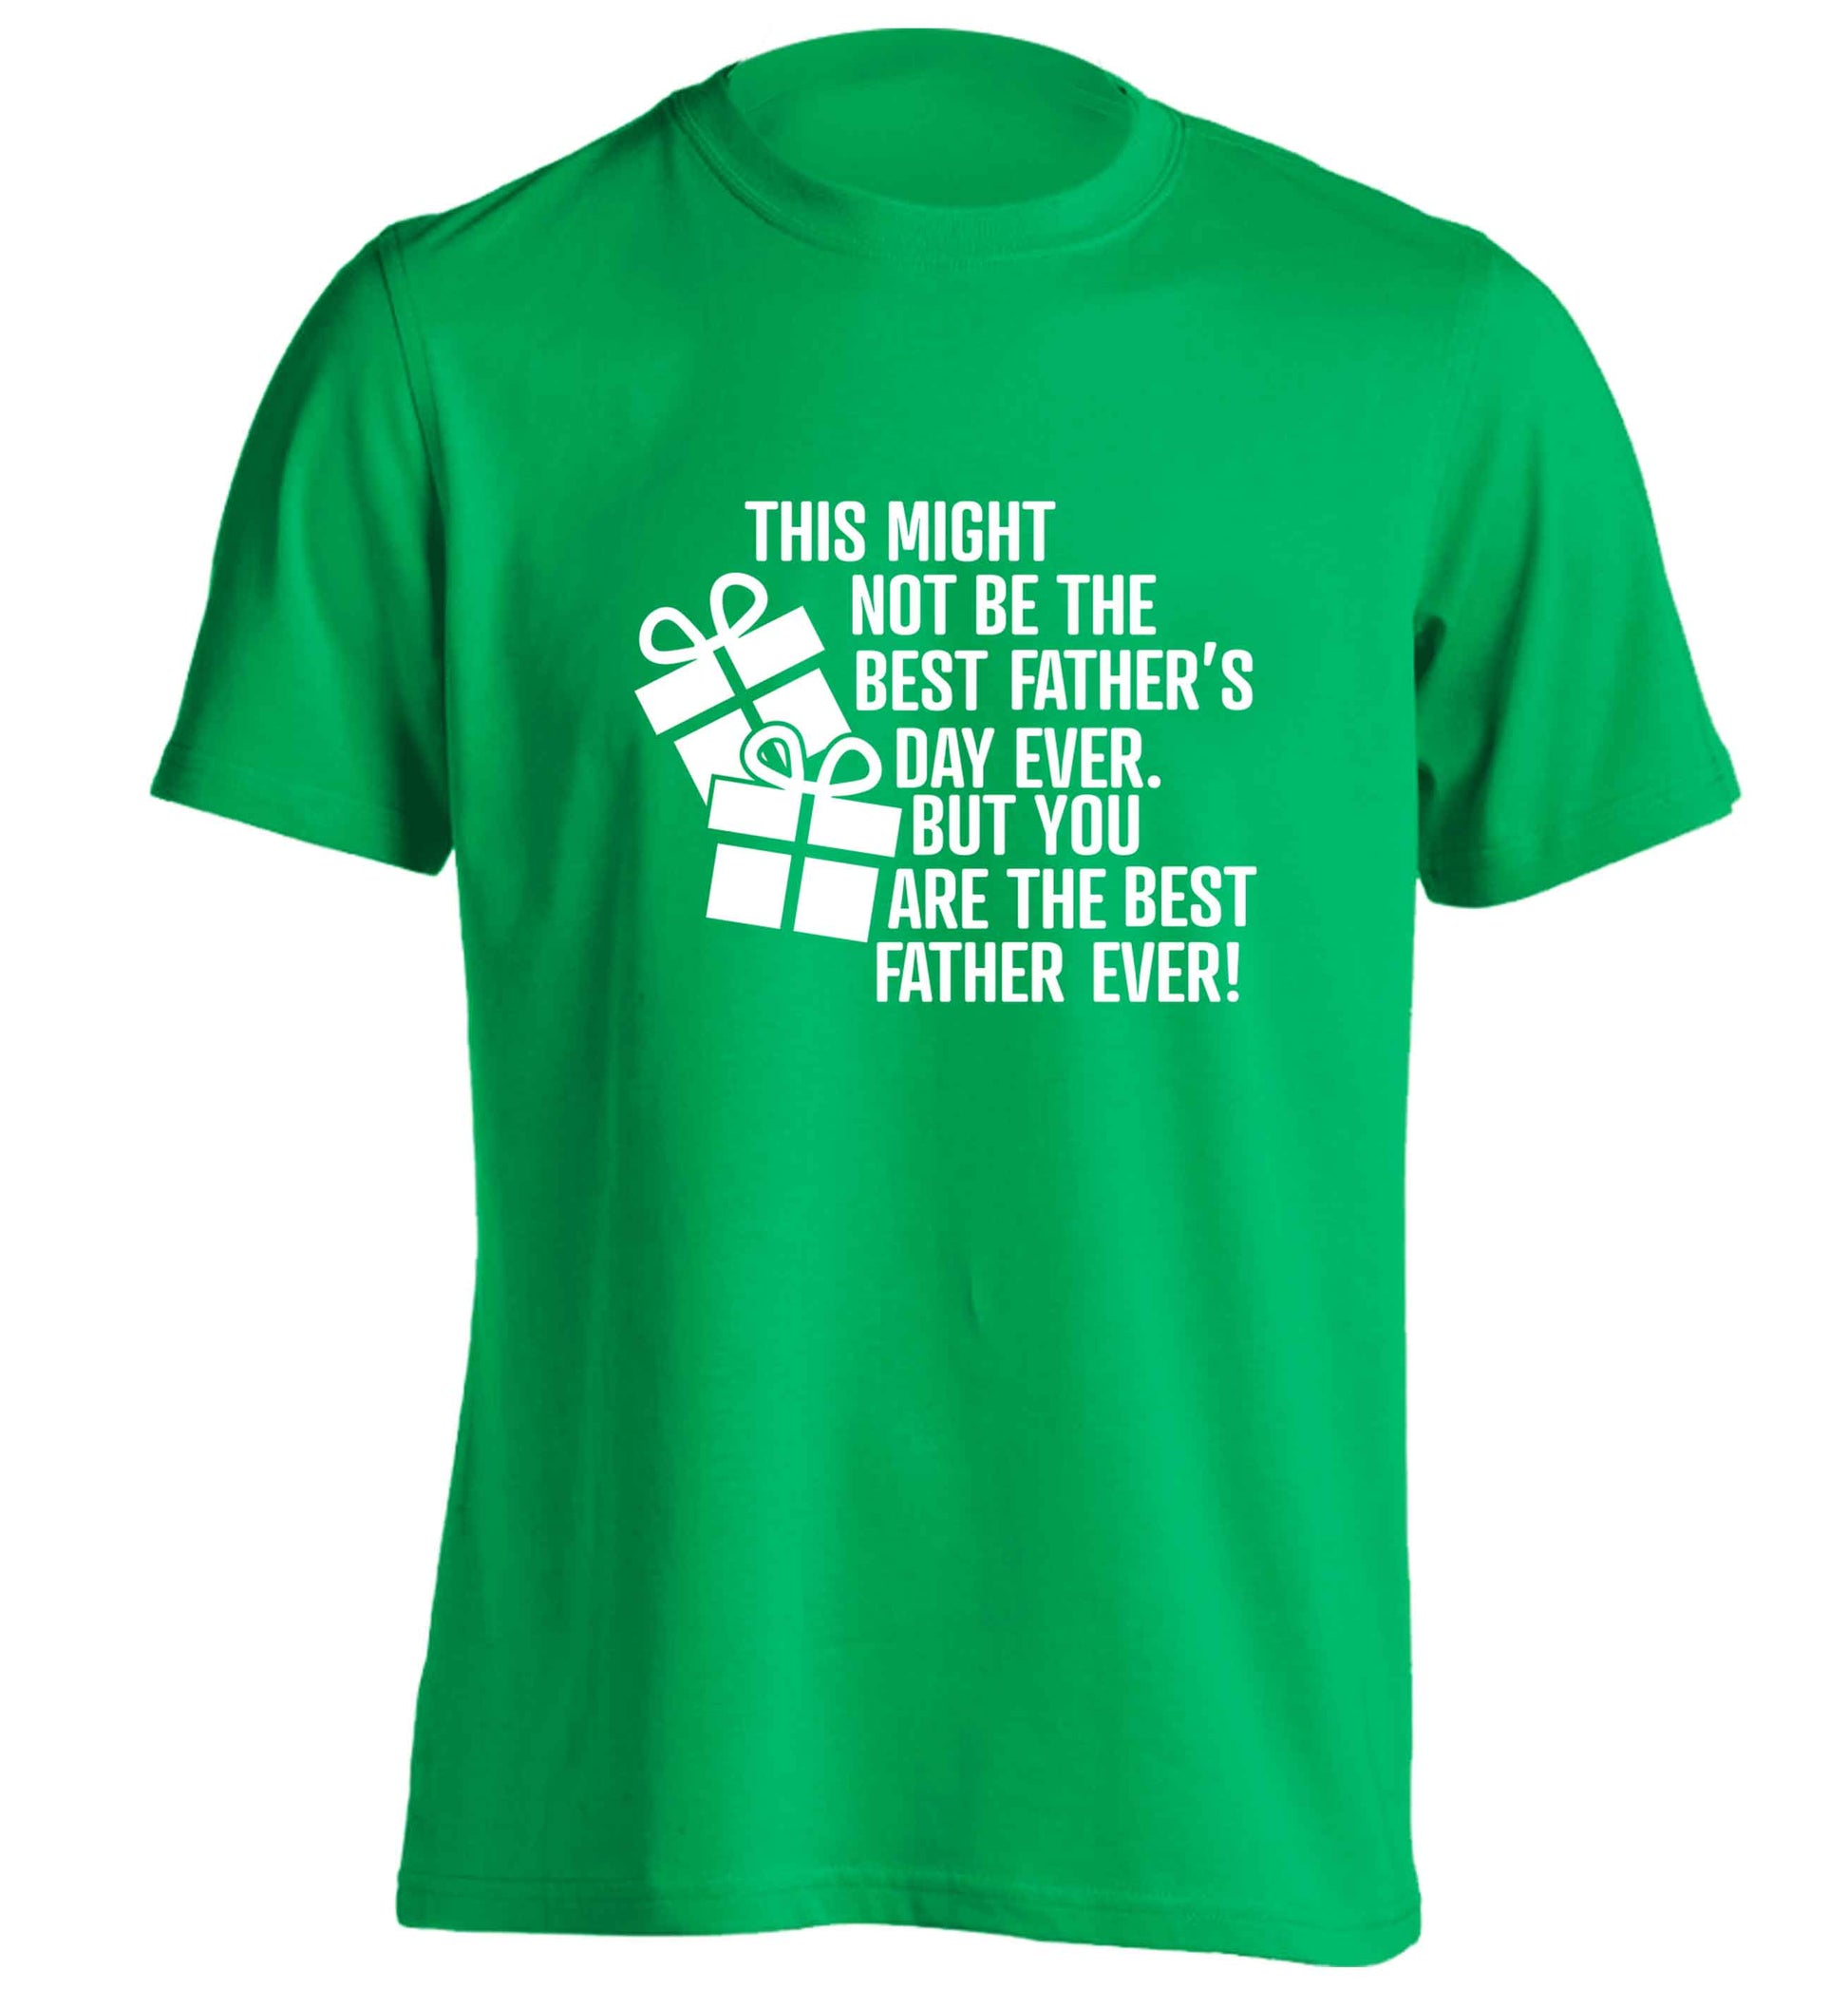 It might not be the best Father's Day ever but you are the best father ever! adults unisex green Tshirt 2XL